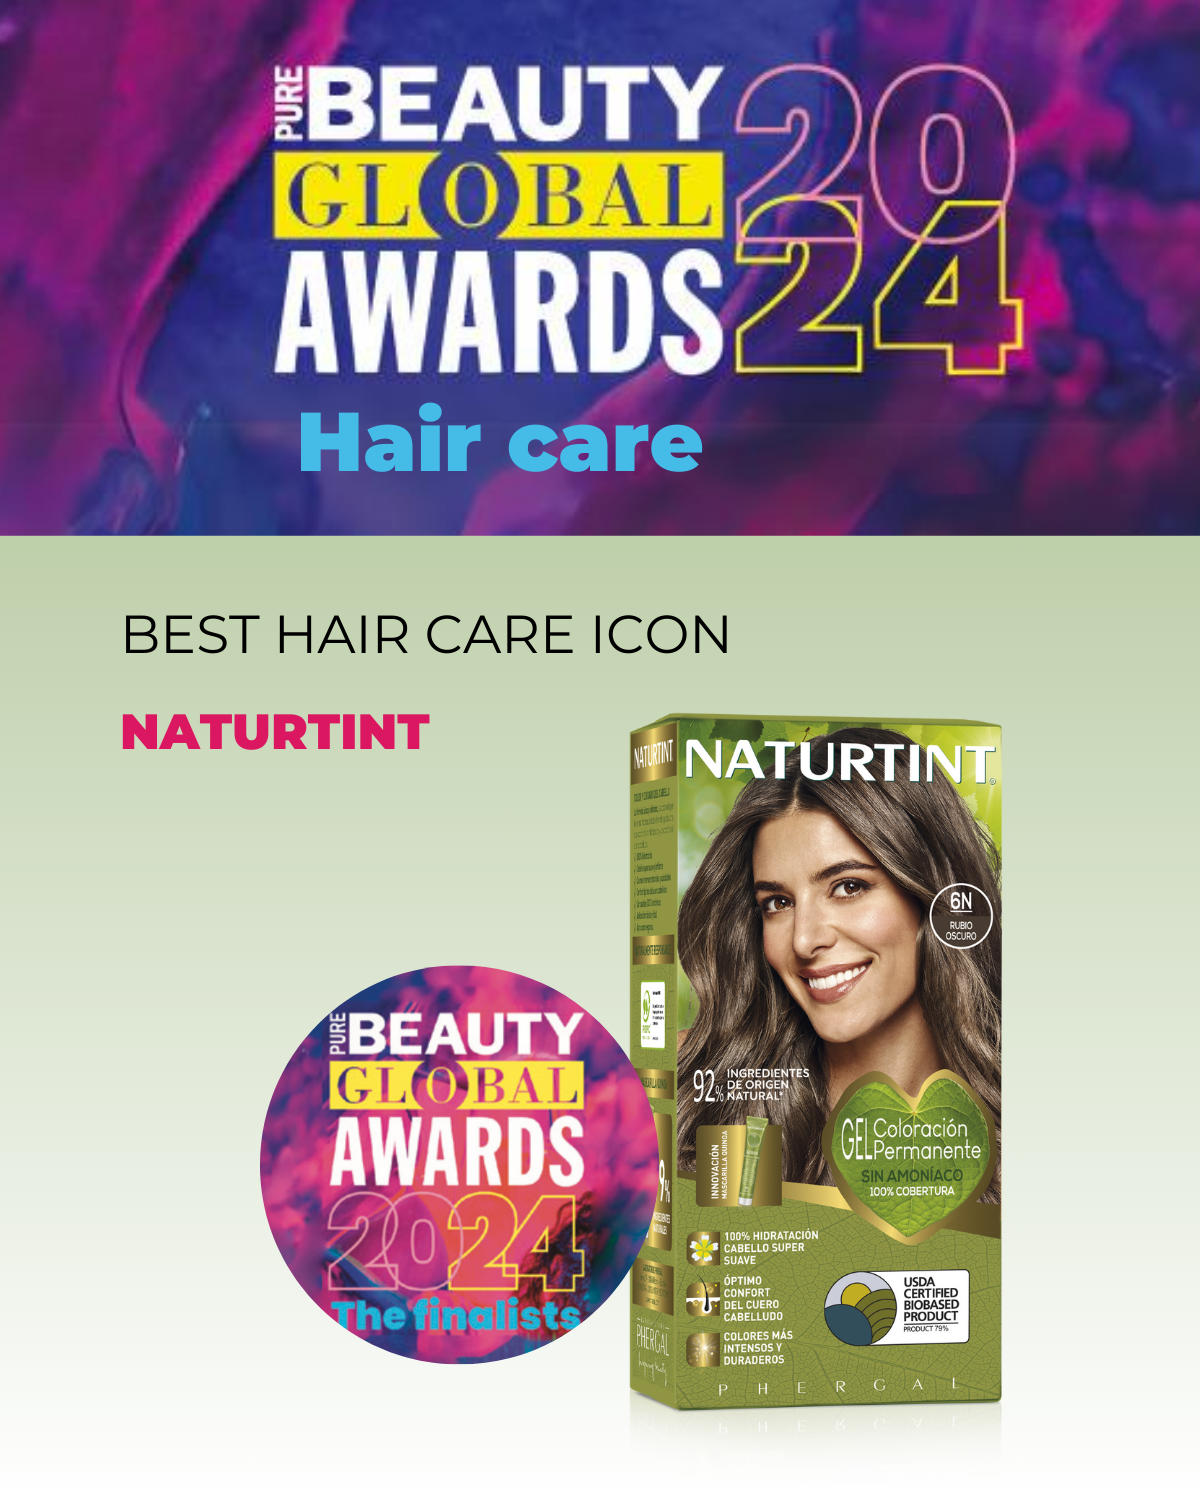 Naturtint – Finalist in the Pure Beauty Global Awards